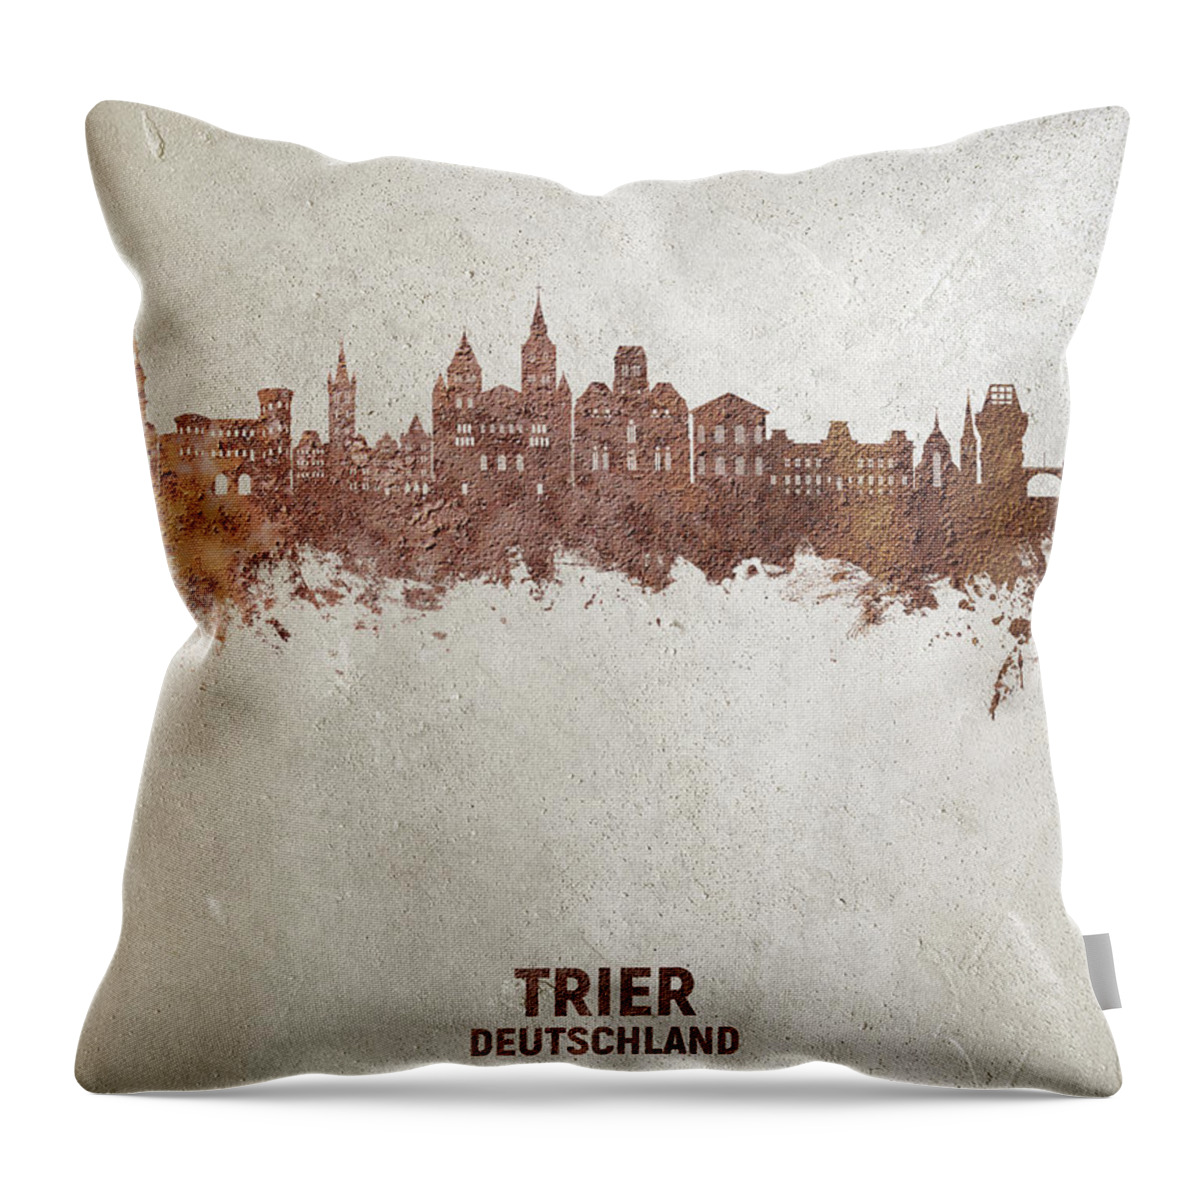 Trier Throw Pillow featuring the digital art Trier Germany Skyline #51 by Michael Tompsett